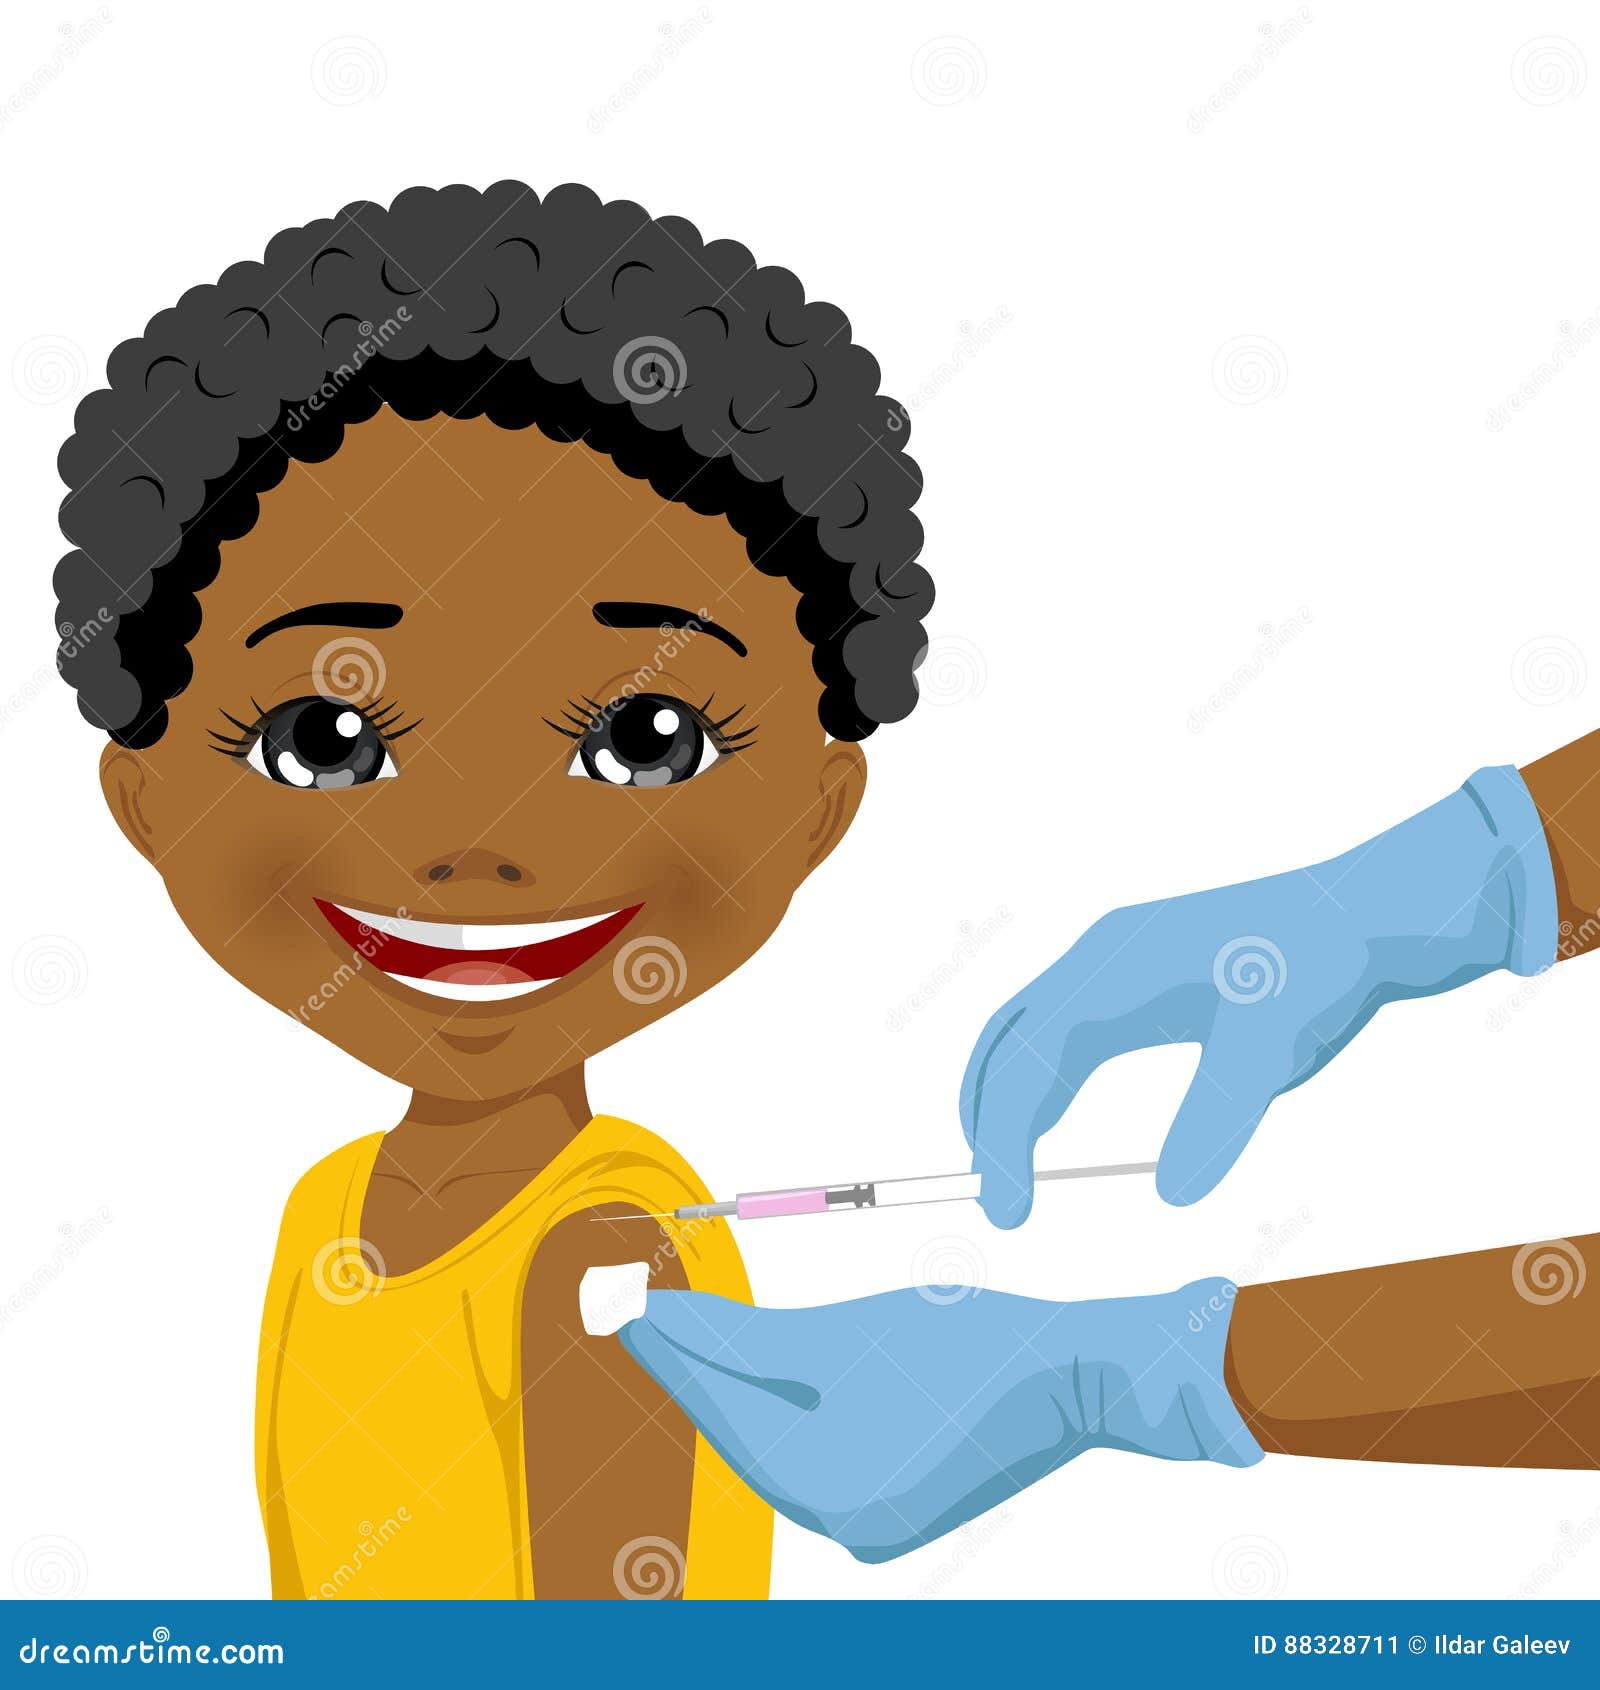 Vaccine Cartoons, Illustrations & Vector Stock Images ...